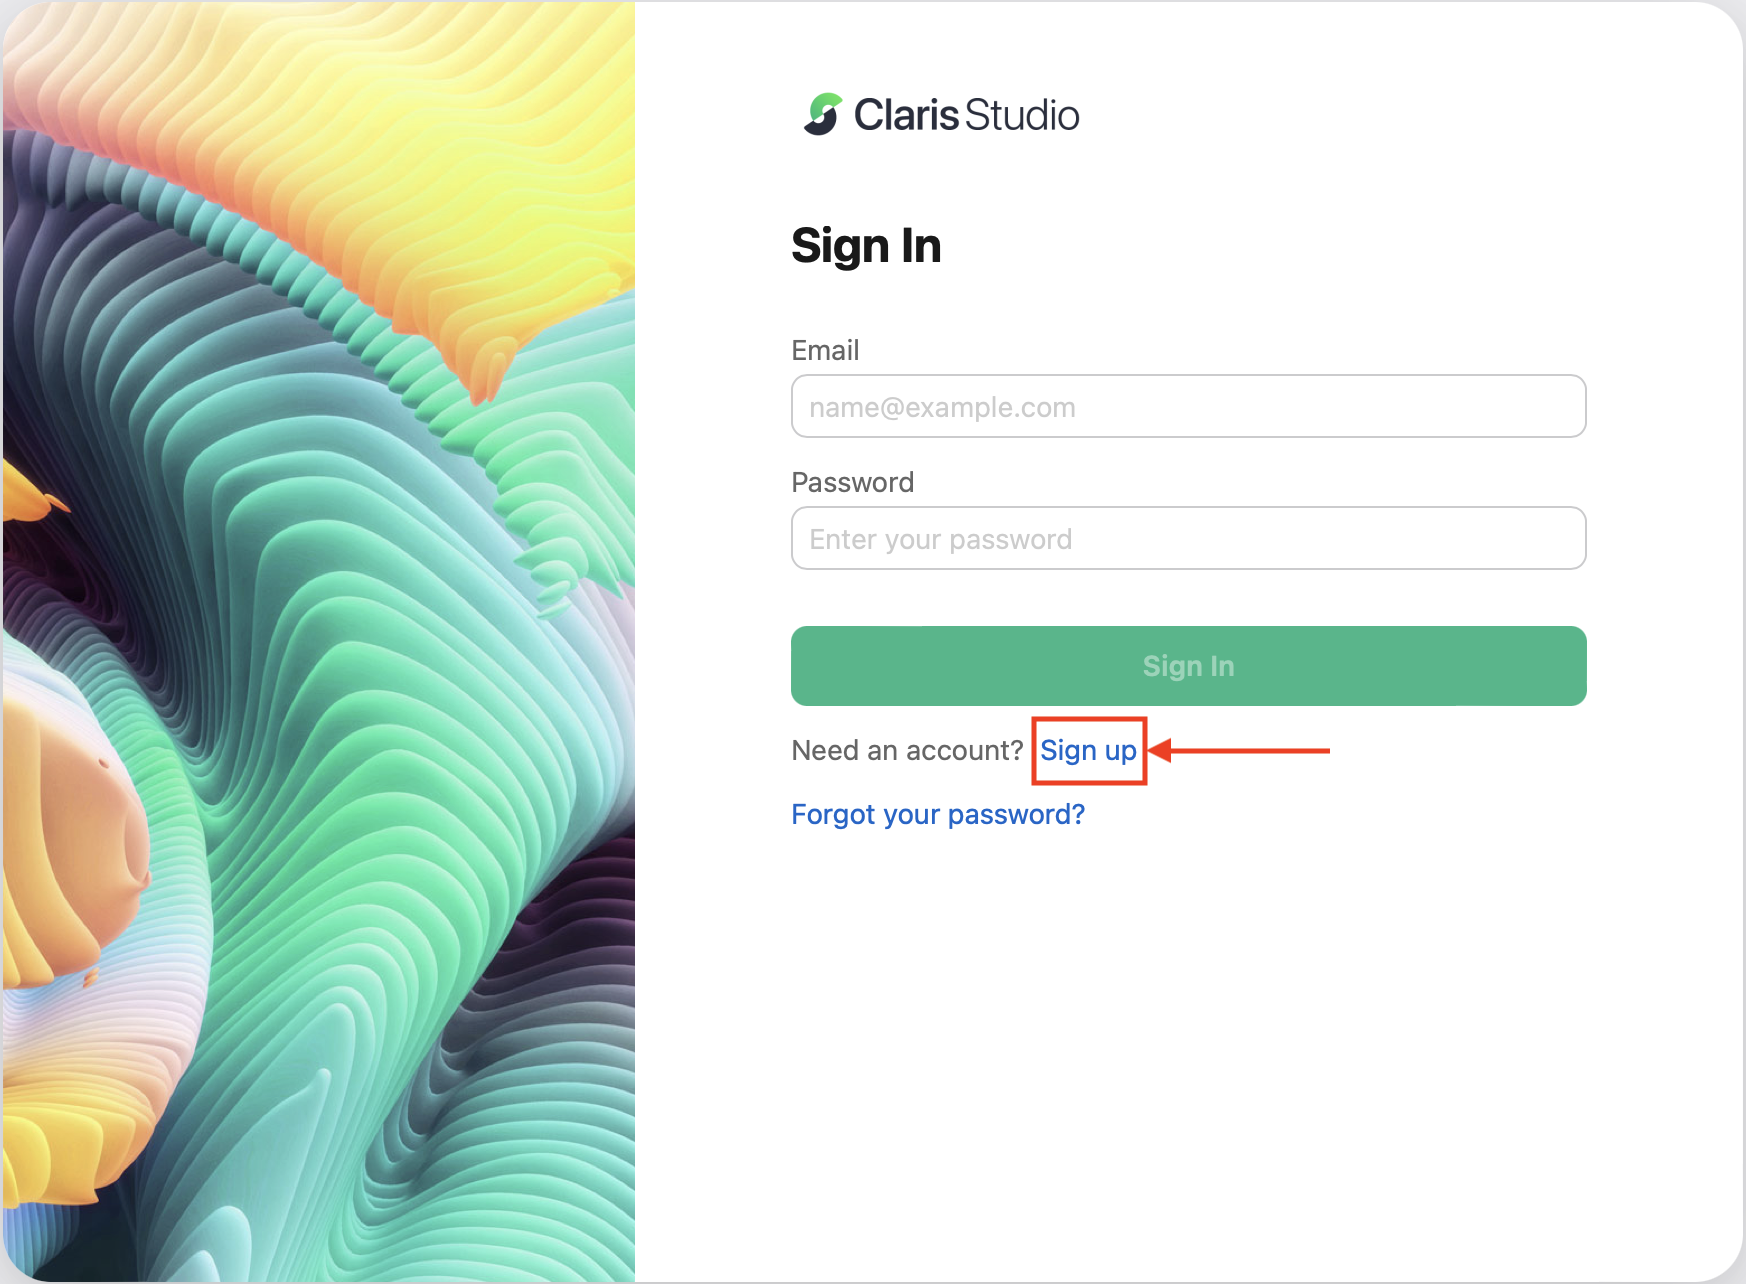 Claris Studio Sign-in or Sign-up page with sign up indicated